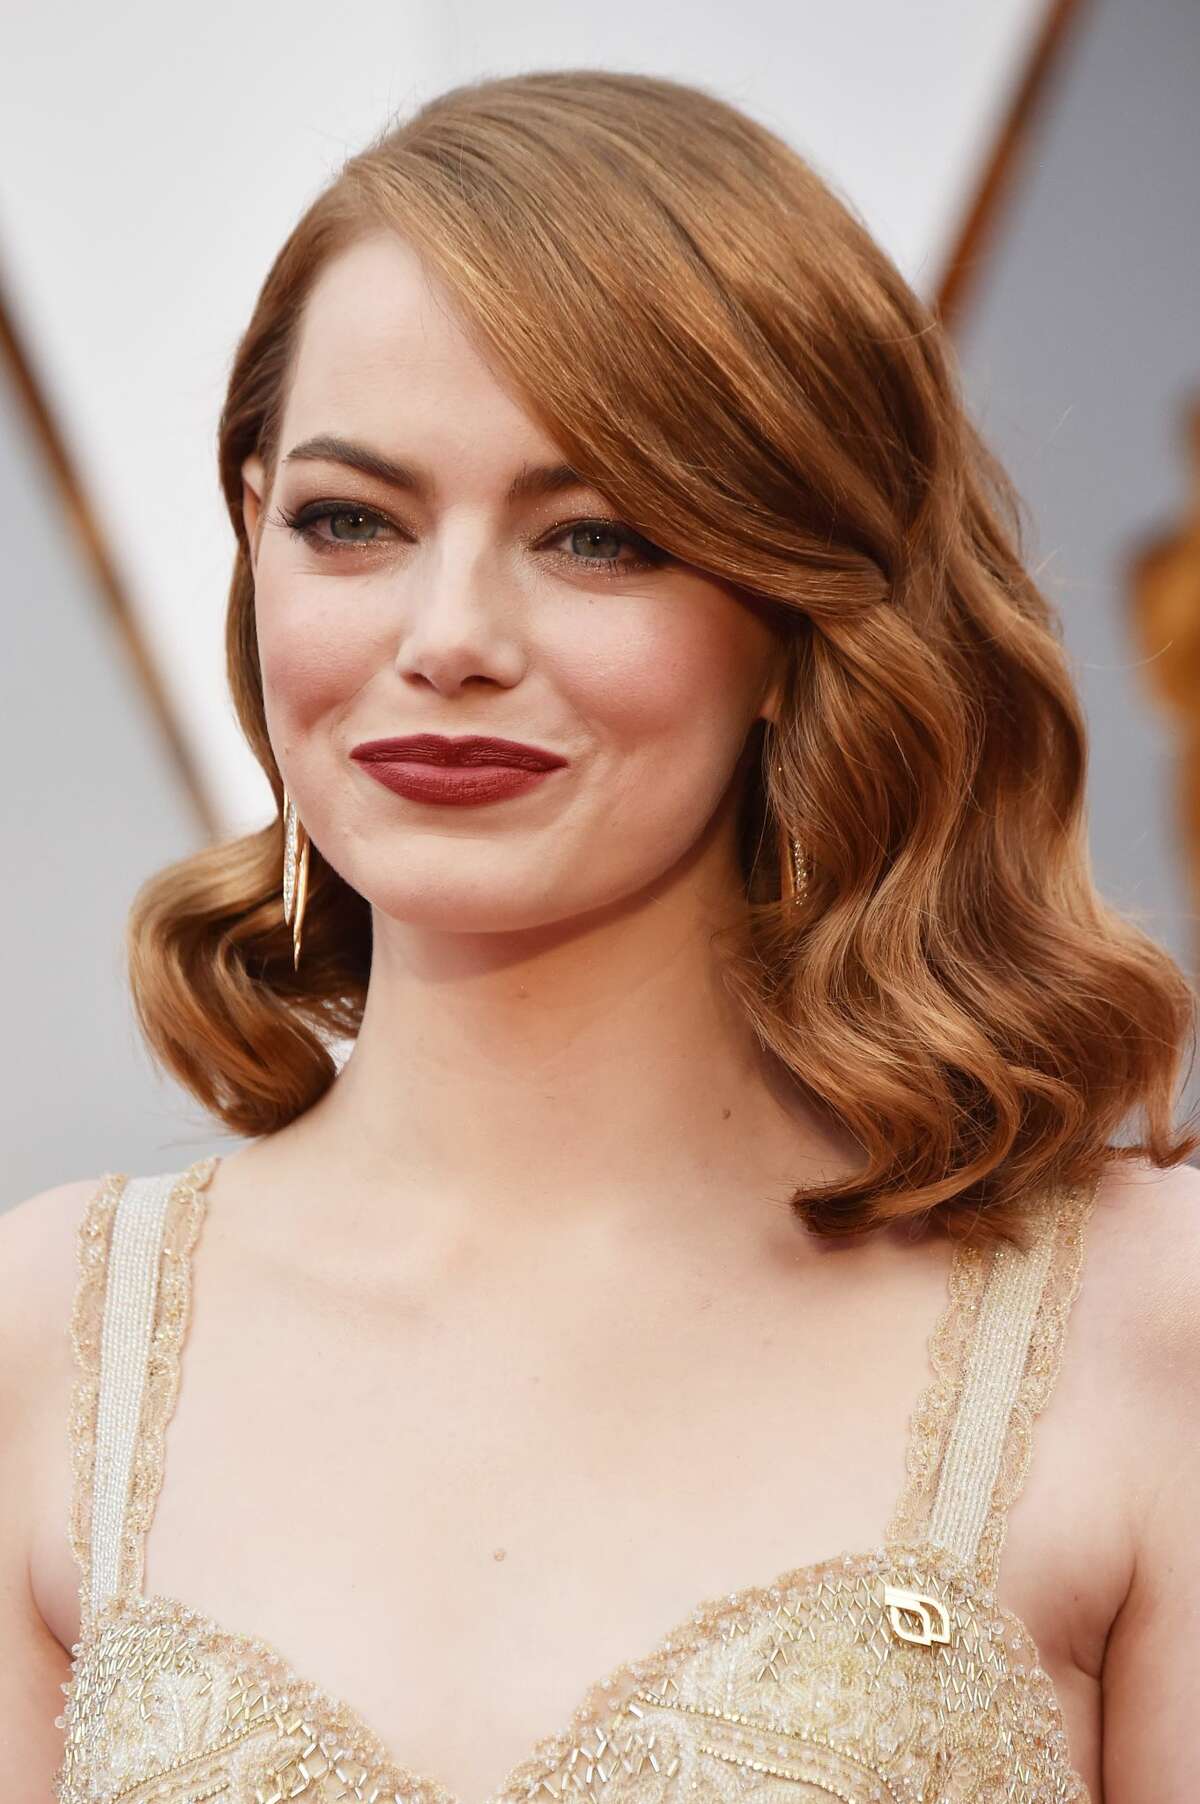 Actor Emma Stone wears a Planned Parenthood pin while attending the 89th Annual Academy Awards at Hollywood & Highland Center on February 26, 2017 in Hollywood, California.